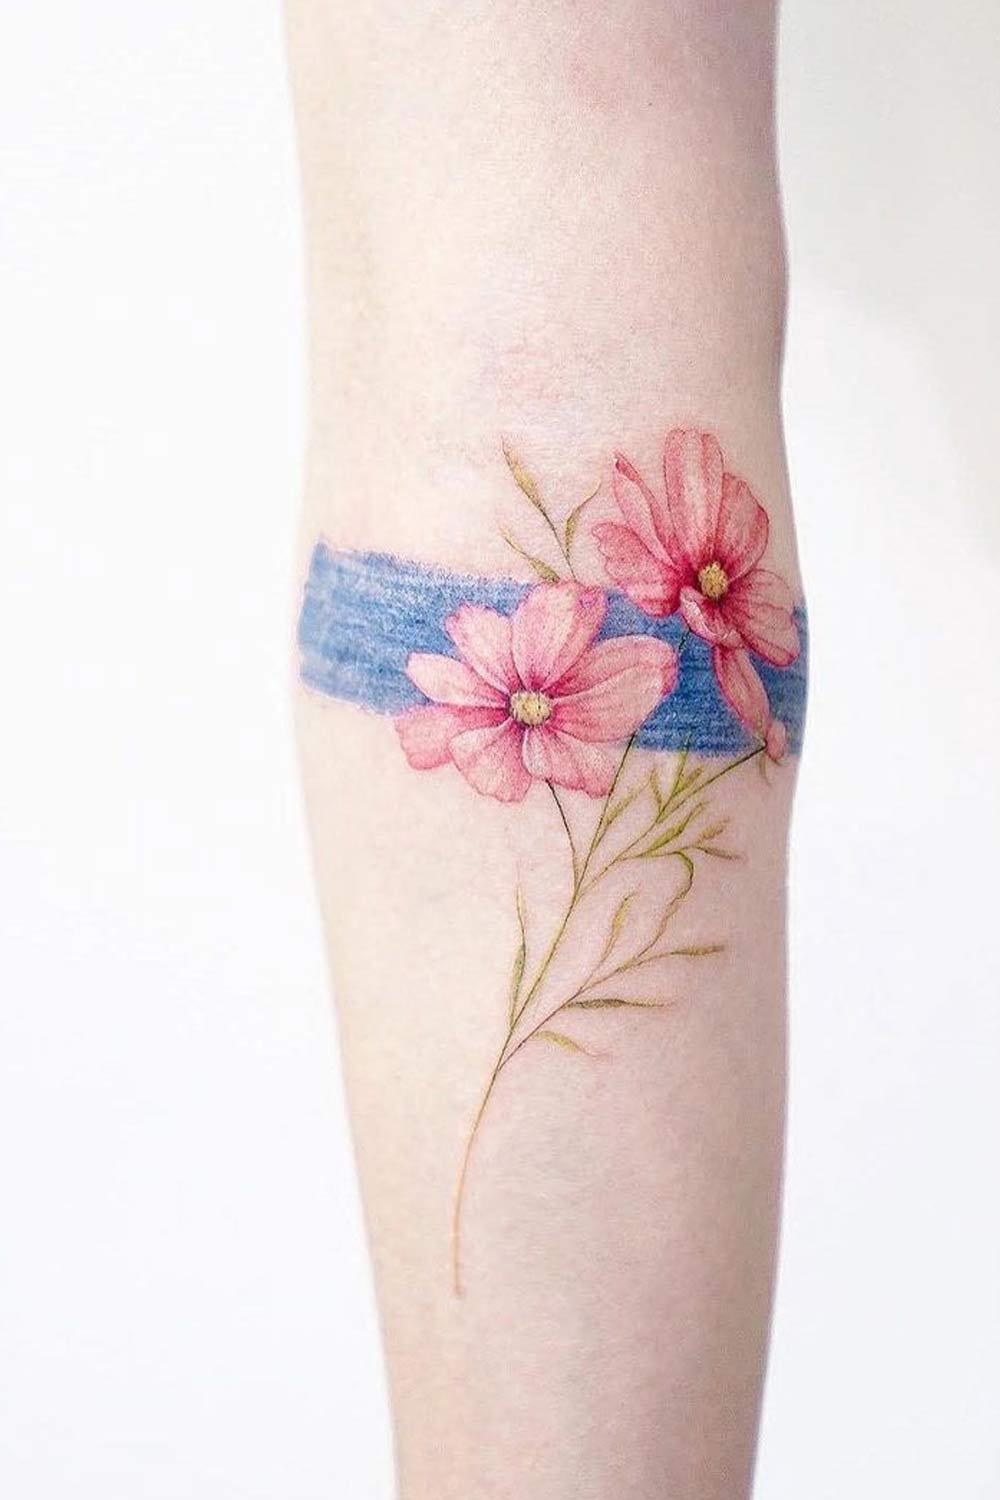 Watercolor Floral Tattoo Design for Arm